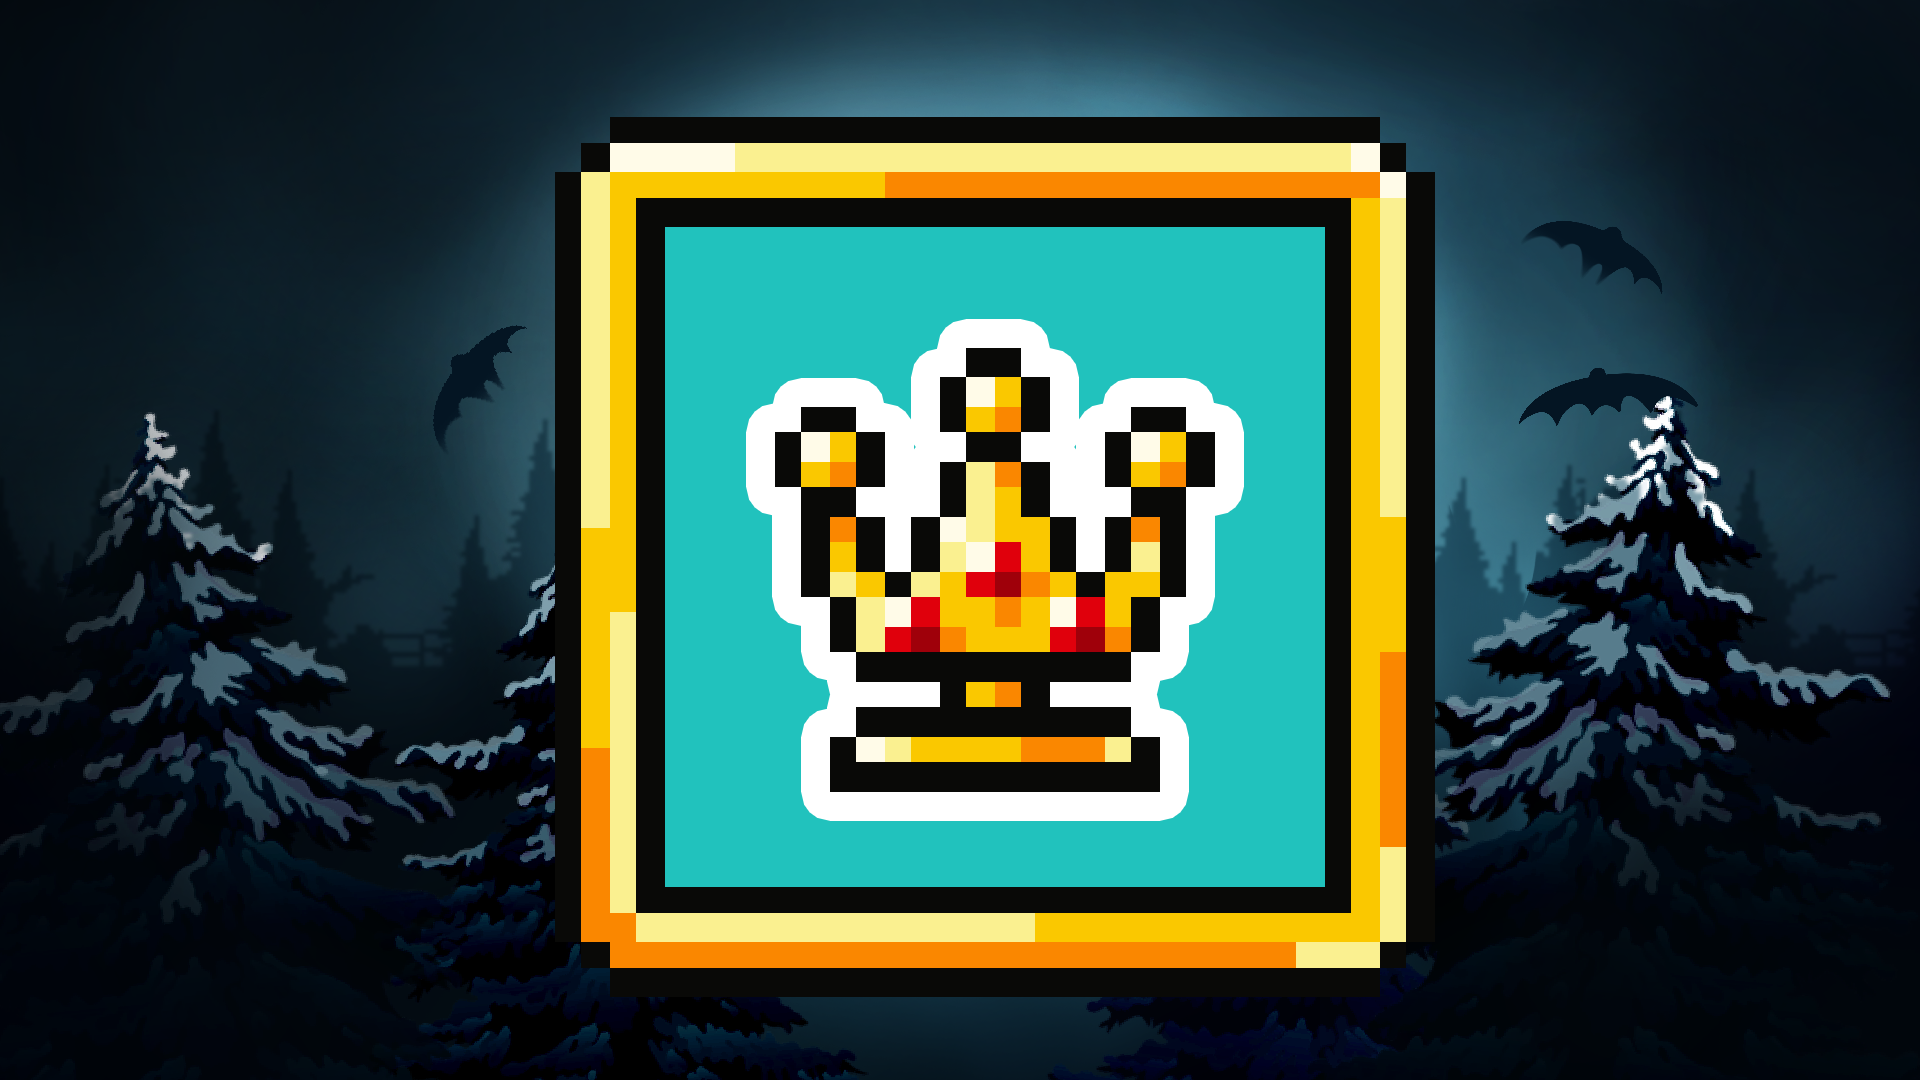 Icon for Golden Crown